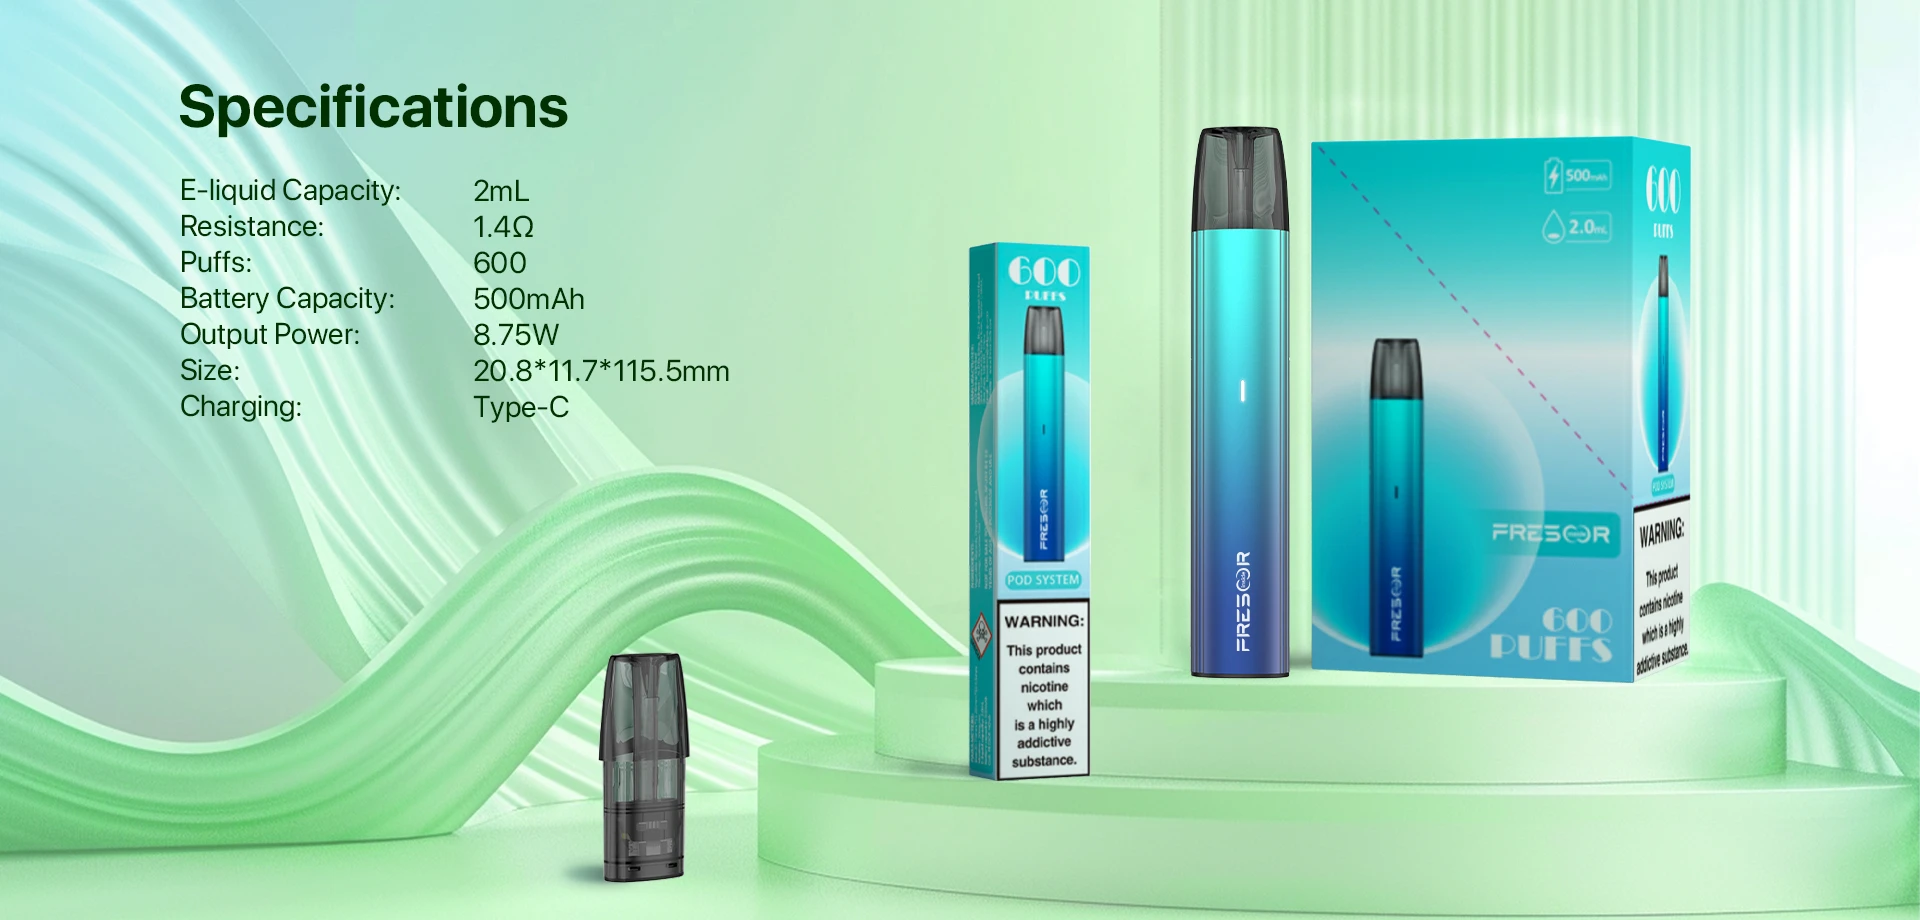 Specifications E-liquid Capacity: 2mL Resistance: 1.42Ω Puffs: 600 Battery Capacity: 500mAh Output Power: 8.75W Size: 20.8*11.7*115.5mm Charging: Type-C